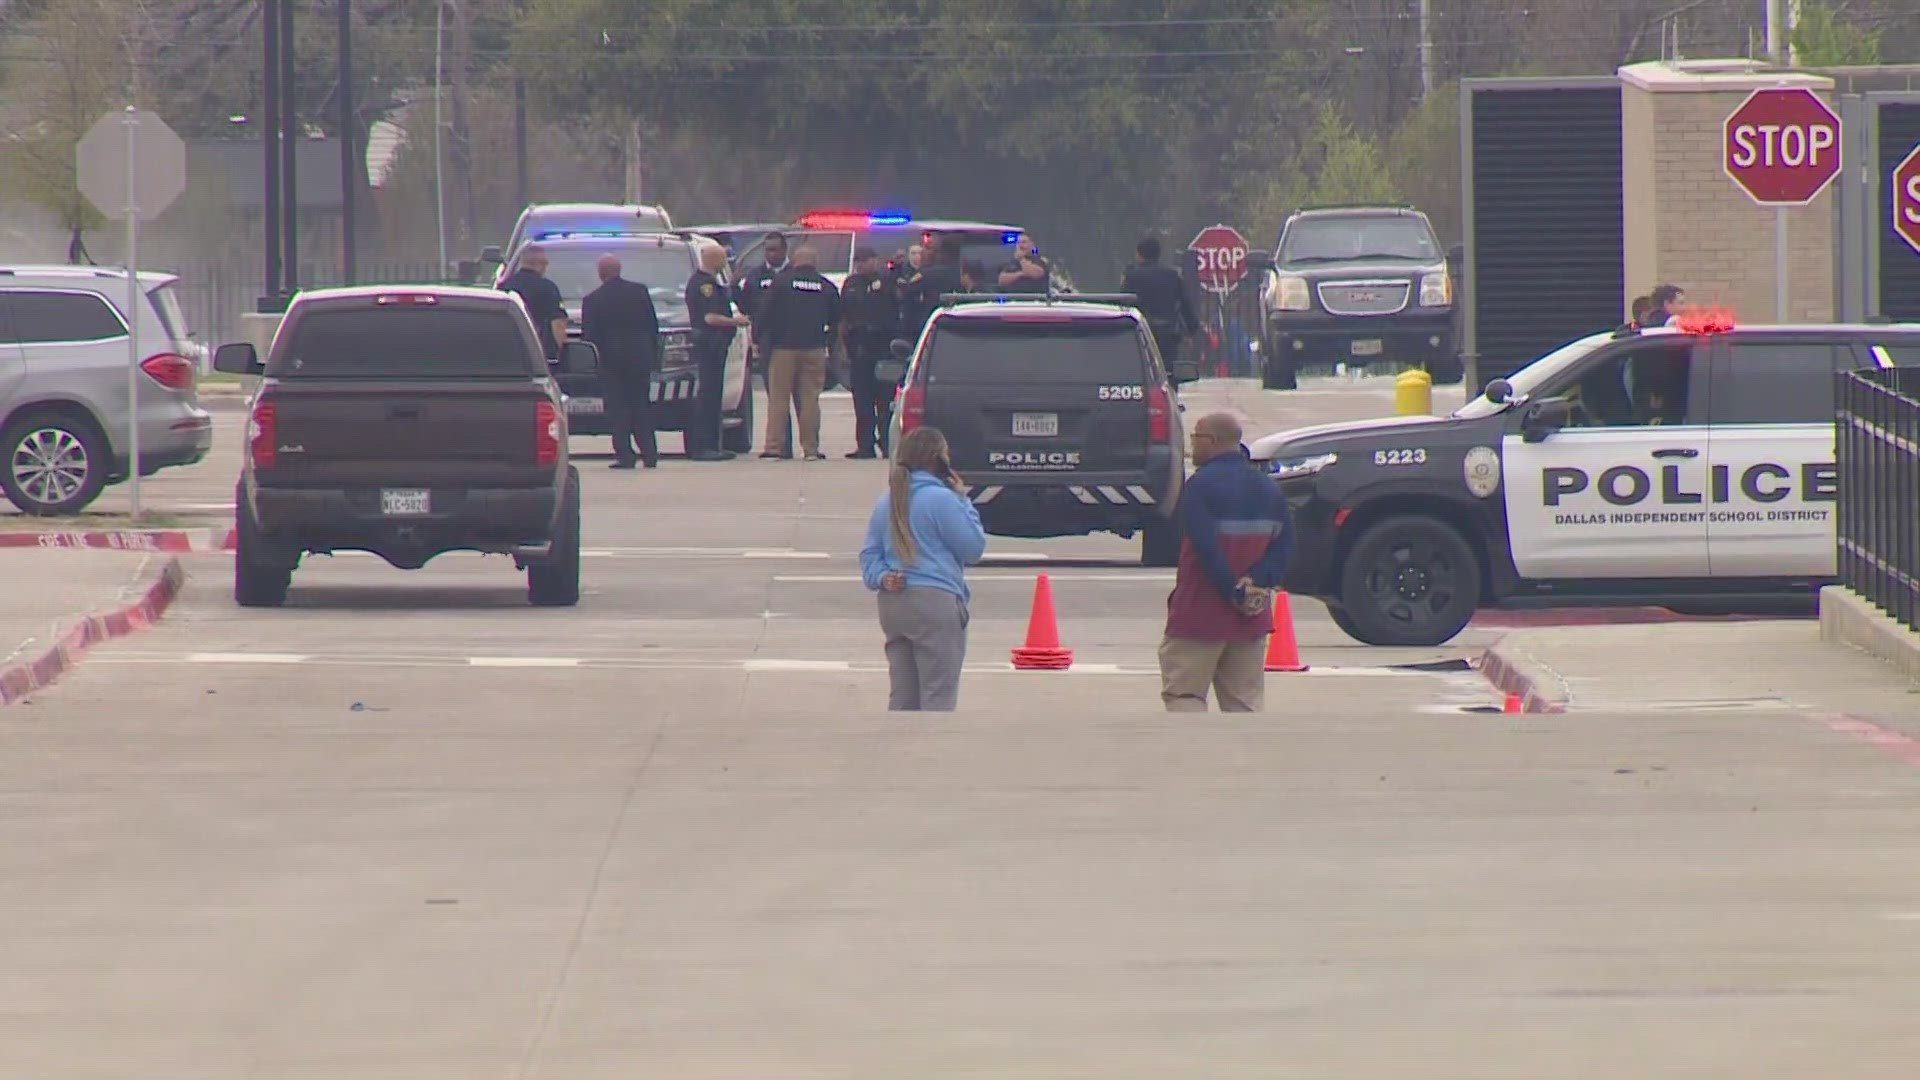 The student was shot in the arm after school, sources close to the investigation added.